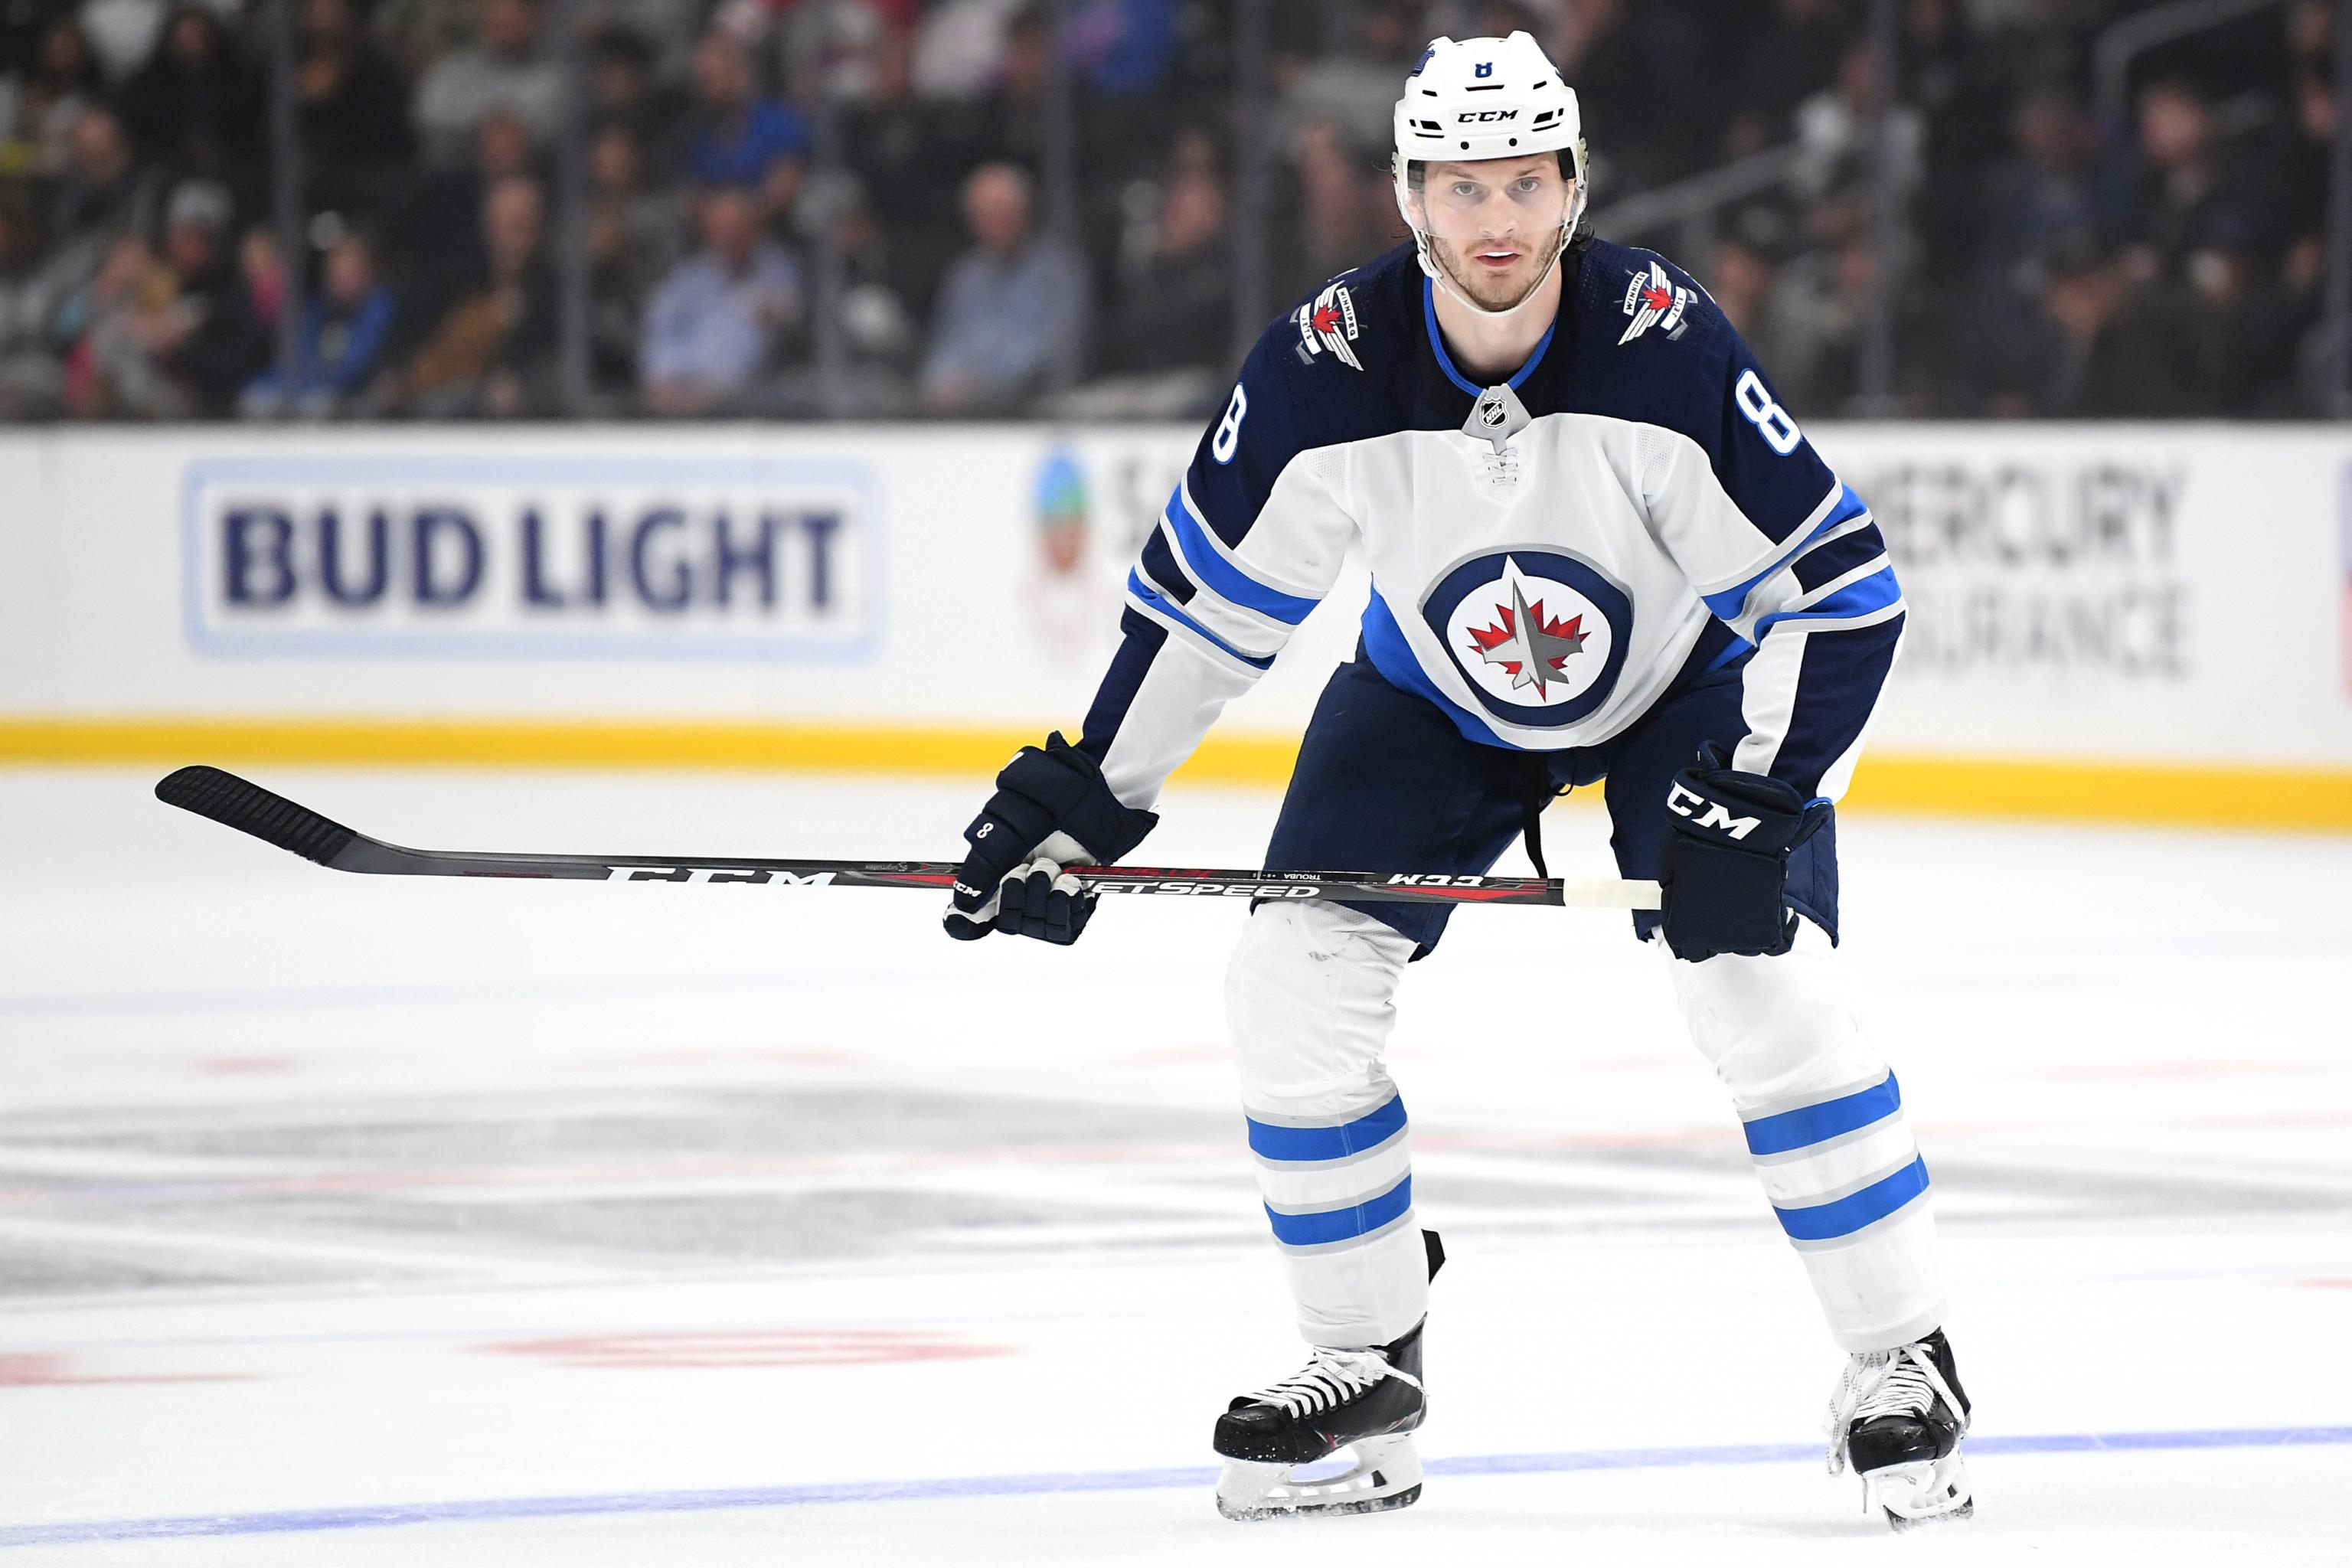 So, what's the deal with Jacob Trouba?